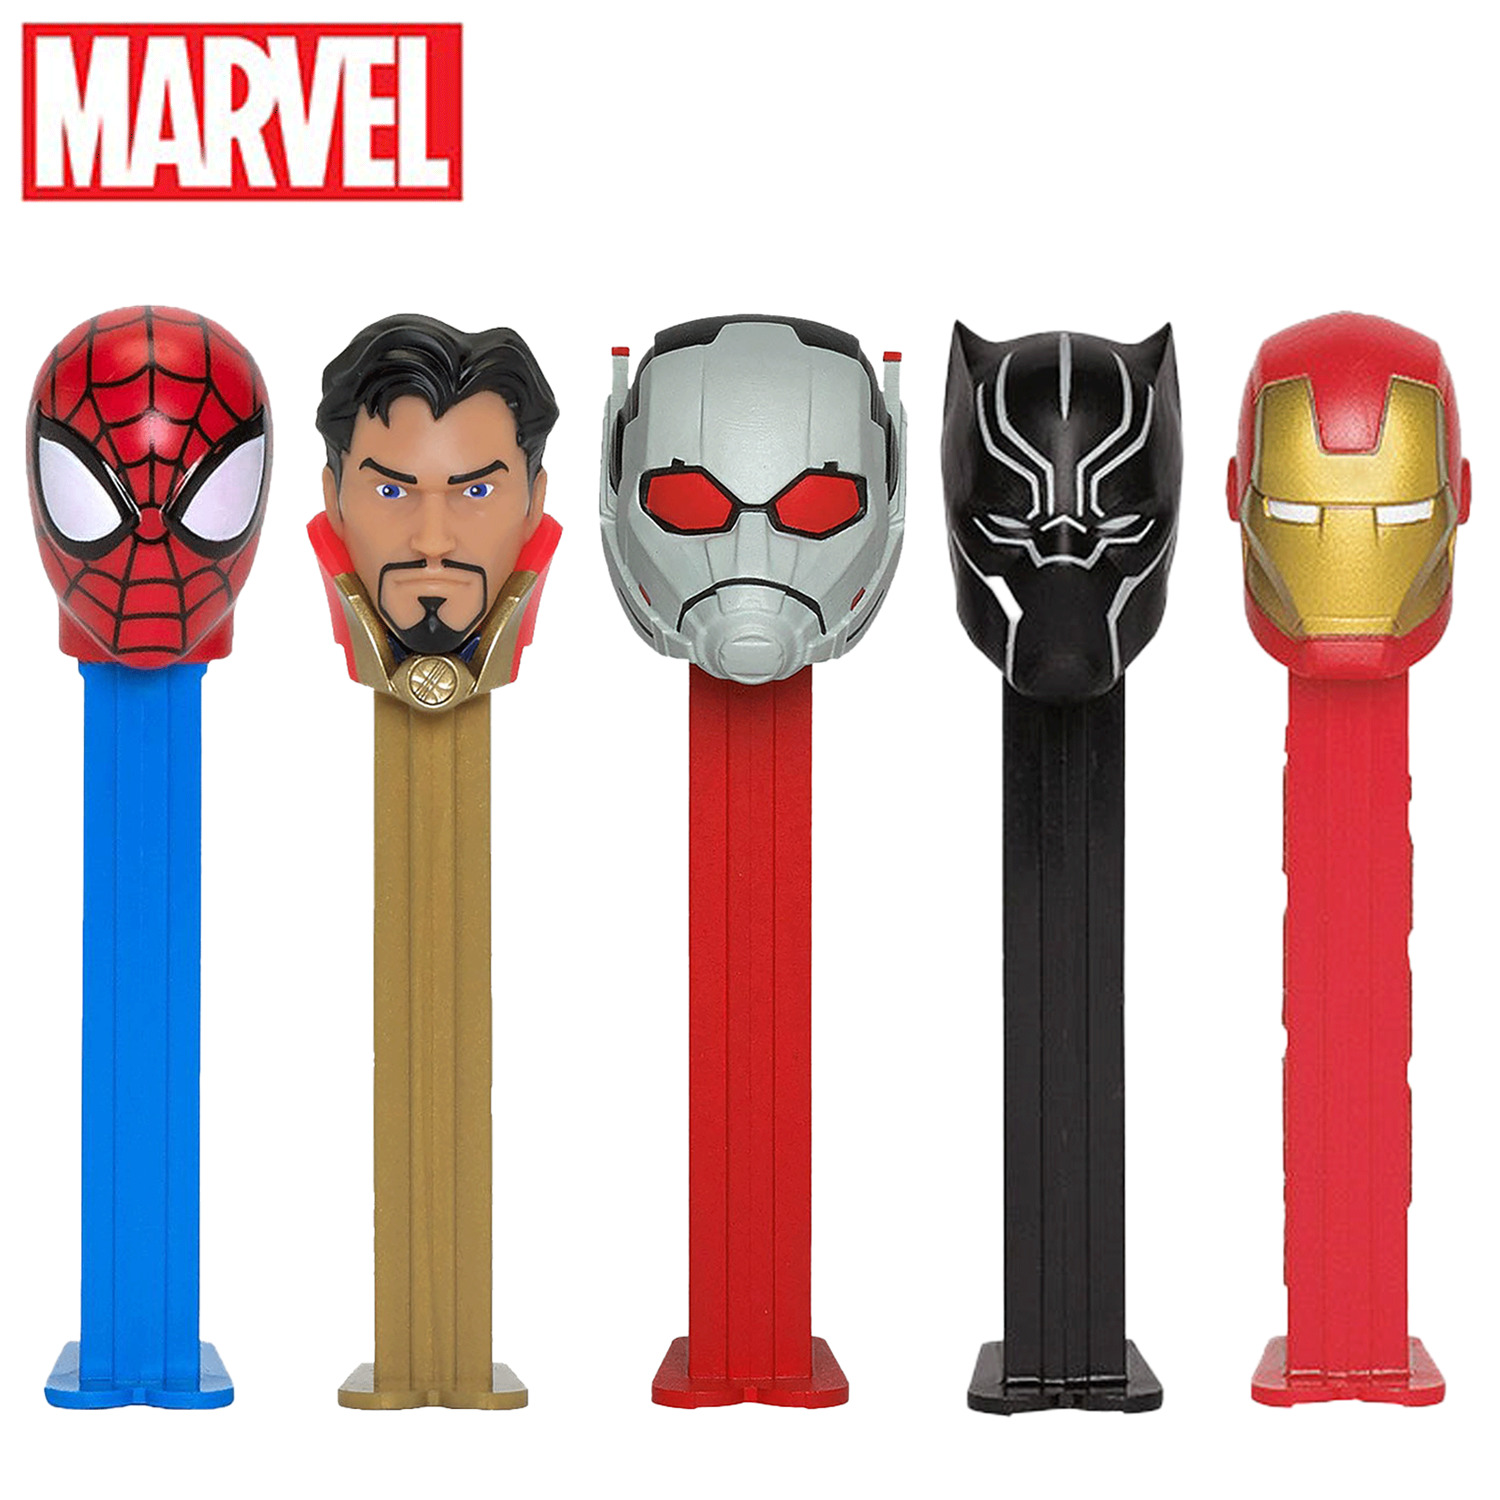 PEZ - Marvel candy dispenser and candy refill set - Iron Man